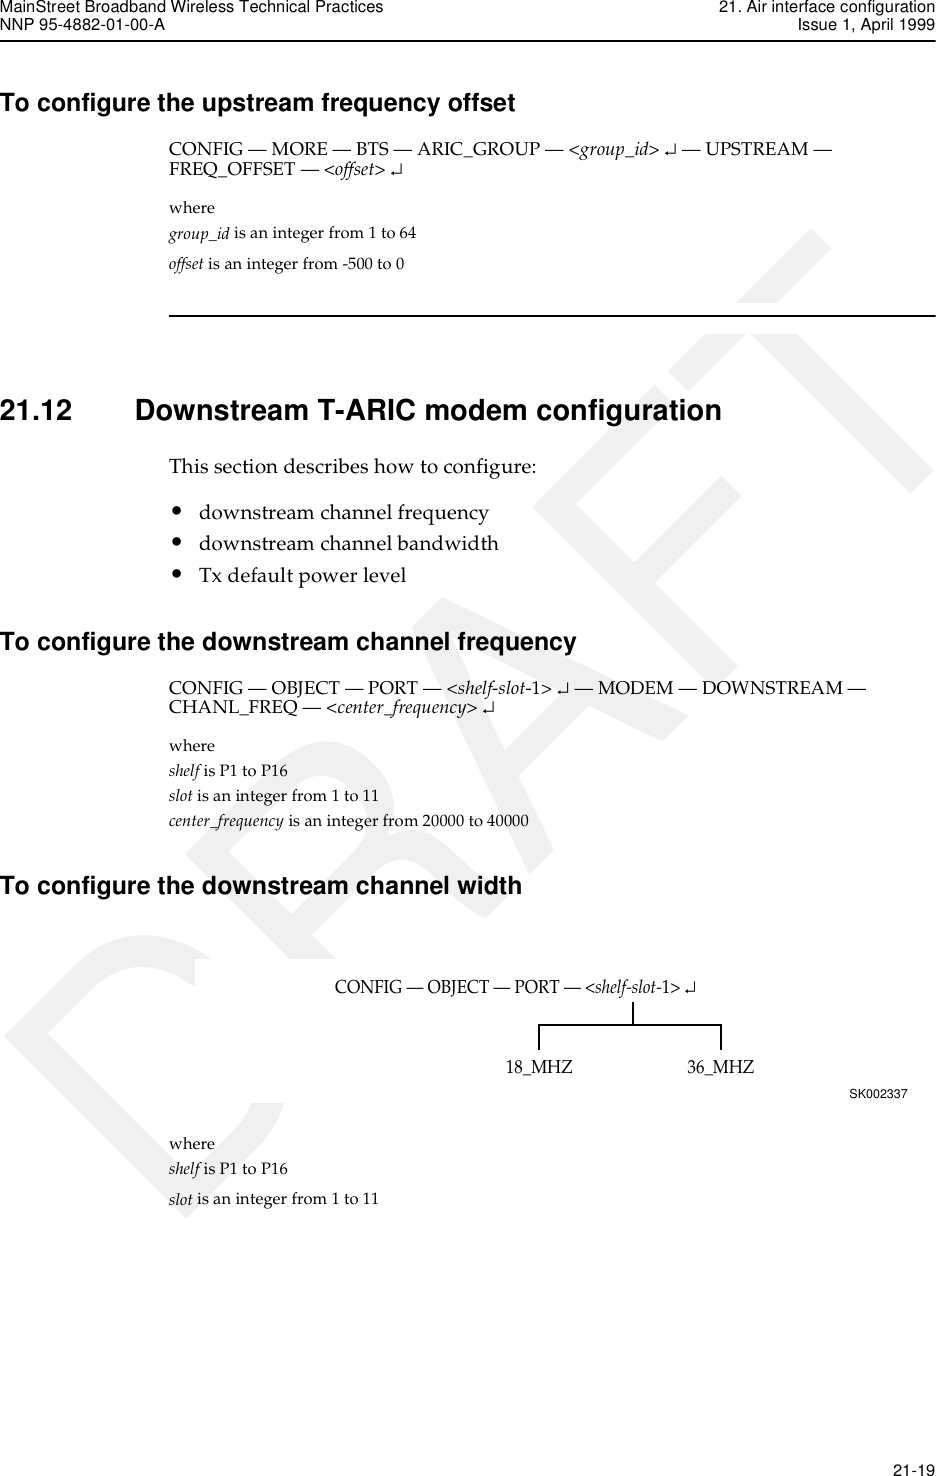 MainStreet Broadband Wireless Technical Practices 21. Air interface configurationNNP 95-4882-01-00-A Issue 1, April 1999   21-19DRAFTTo configure the upstream frequency offsetCONFIG — MORE — BTS — ARIC_GROUP — &lt;group_id&gt; ↵ — UPSTREAM — FREQ_OFFSET — &lt;offset&gt; ↵where group_id is an integer from 1 to 64offset is an integer from -500 to 021.12 Downstream T-ARIC modem configurationThis section describes how to configure:•downstream channel frequency•downstream channel bandwidth•Tx default power levelTo configure the downstream channel frequencyCONFIG — OBJECT — PORT — &lt;shelf-slot-1&gt; ↵ — MODEM — DOWNSTREAM — CHANL_FREQ — &lt;center_frequency&gt; ↵where shelf is P1 to P16slot is an integer from 1 to 11center_frequency is an integer from 20000 to 40000To configure the downstream channel widthwhere shelf is P1 to P16slot is an integer from 1 to 11CONFIG — OBJECT — PORT — &lt;shelf-slot-1&gt; ↵SK00233736_MHZ18_MHZ